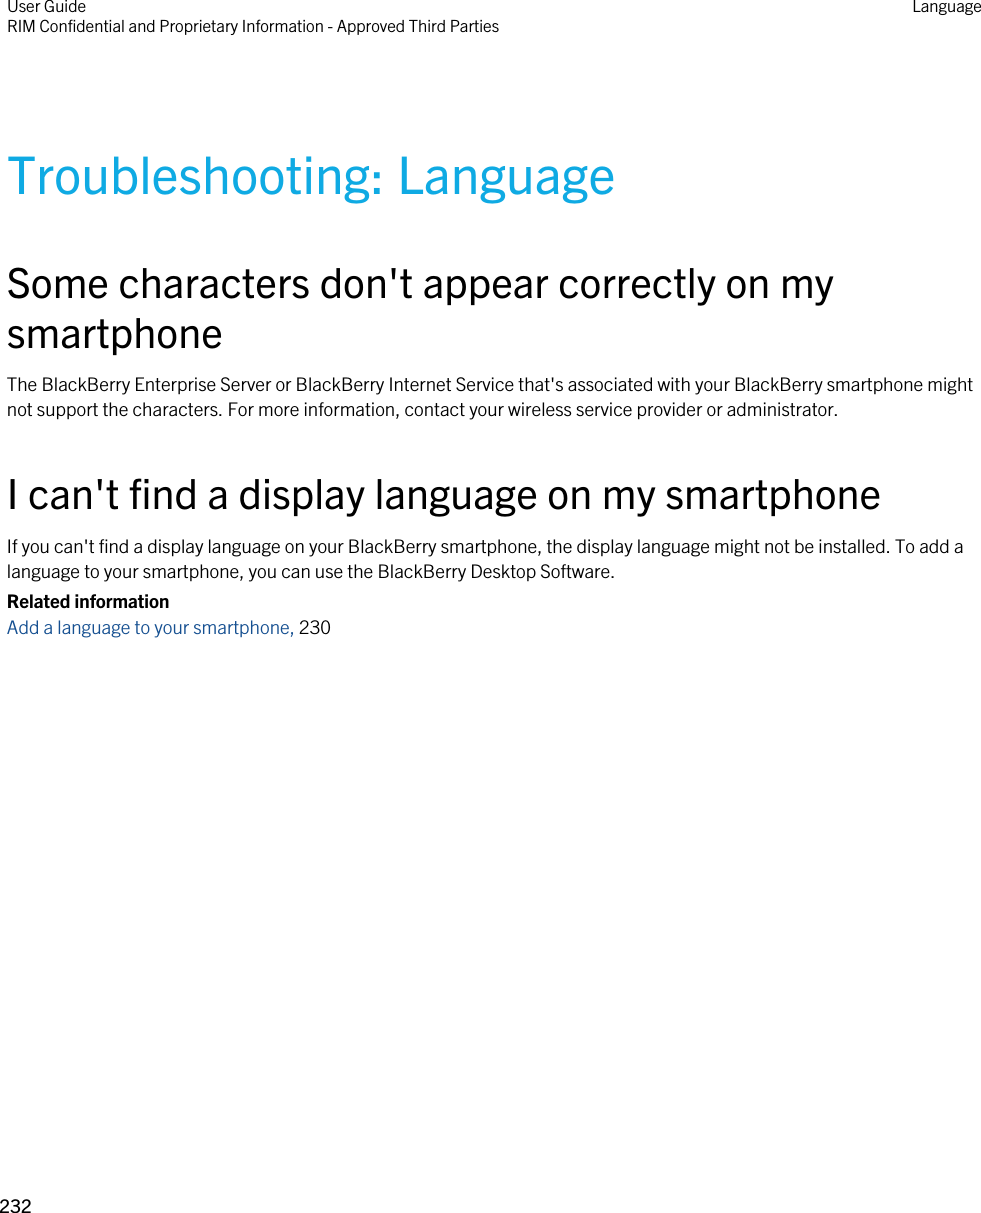 Troubleshooting: LanguageSome characters don&apos;t appear correctly on my smartphoneThe BlackBerry Enterprise Server or BlackBerry Internet Service that&apos;s associated with your BlackBerry smartphone might not support the characters. For more information, contact your wireless service provider or administrator.I can&apos;t find a display language on my smartphoneIf you can&apos;t find a display language on your BlackBerry smartphone, the display language might not be installed. To add a language to your smartphone, you can use the BlackBerry Desktop Software.Related informationAdd a language to your smartphone, 230 User GuideRIM Confidential and Proprietary Information - Approved Third Parties Language232 